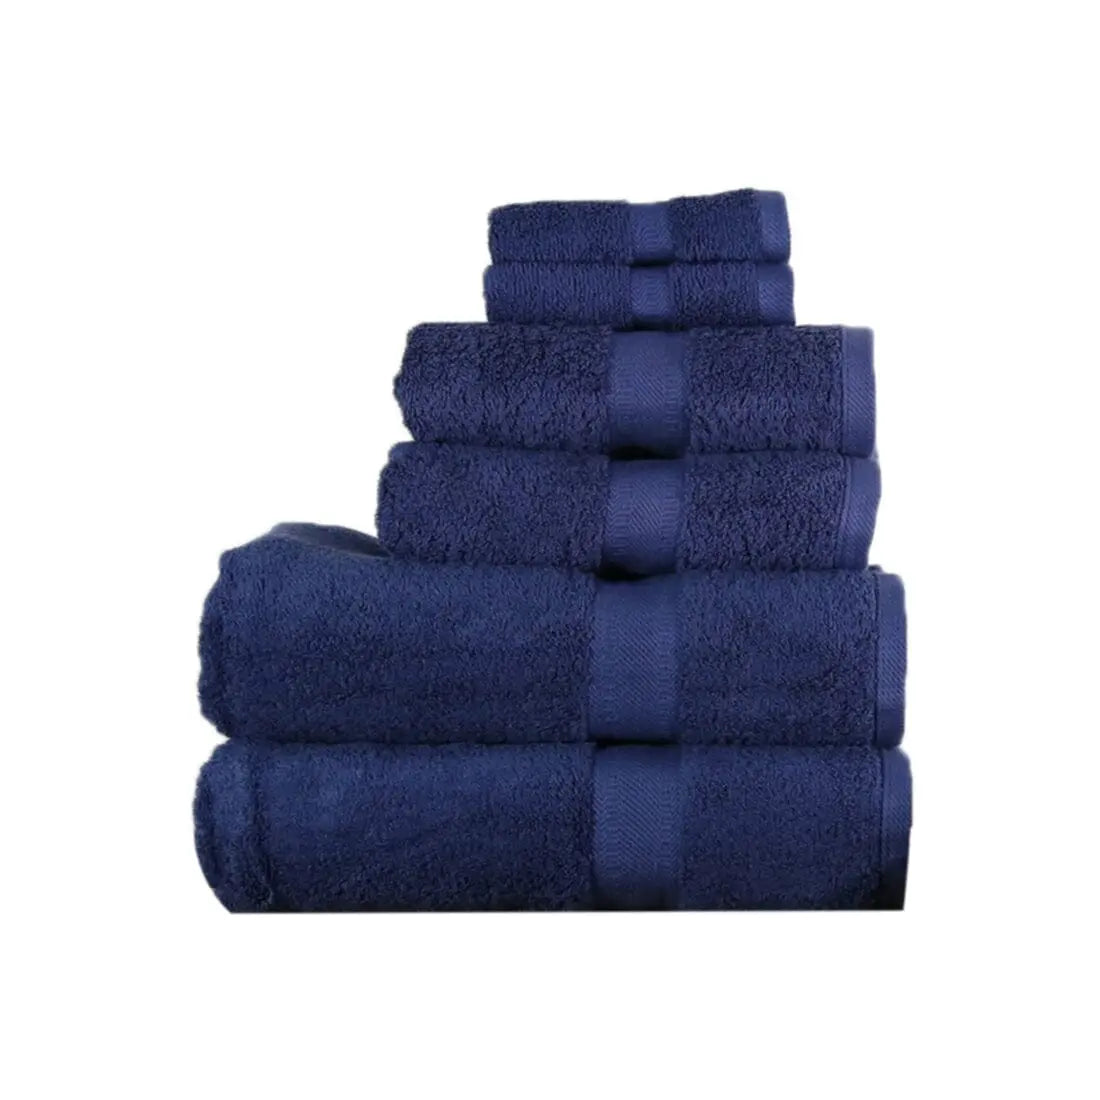 Egyptian Cotton 550gsm 6 Piece Towel Bale in navy